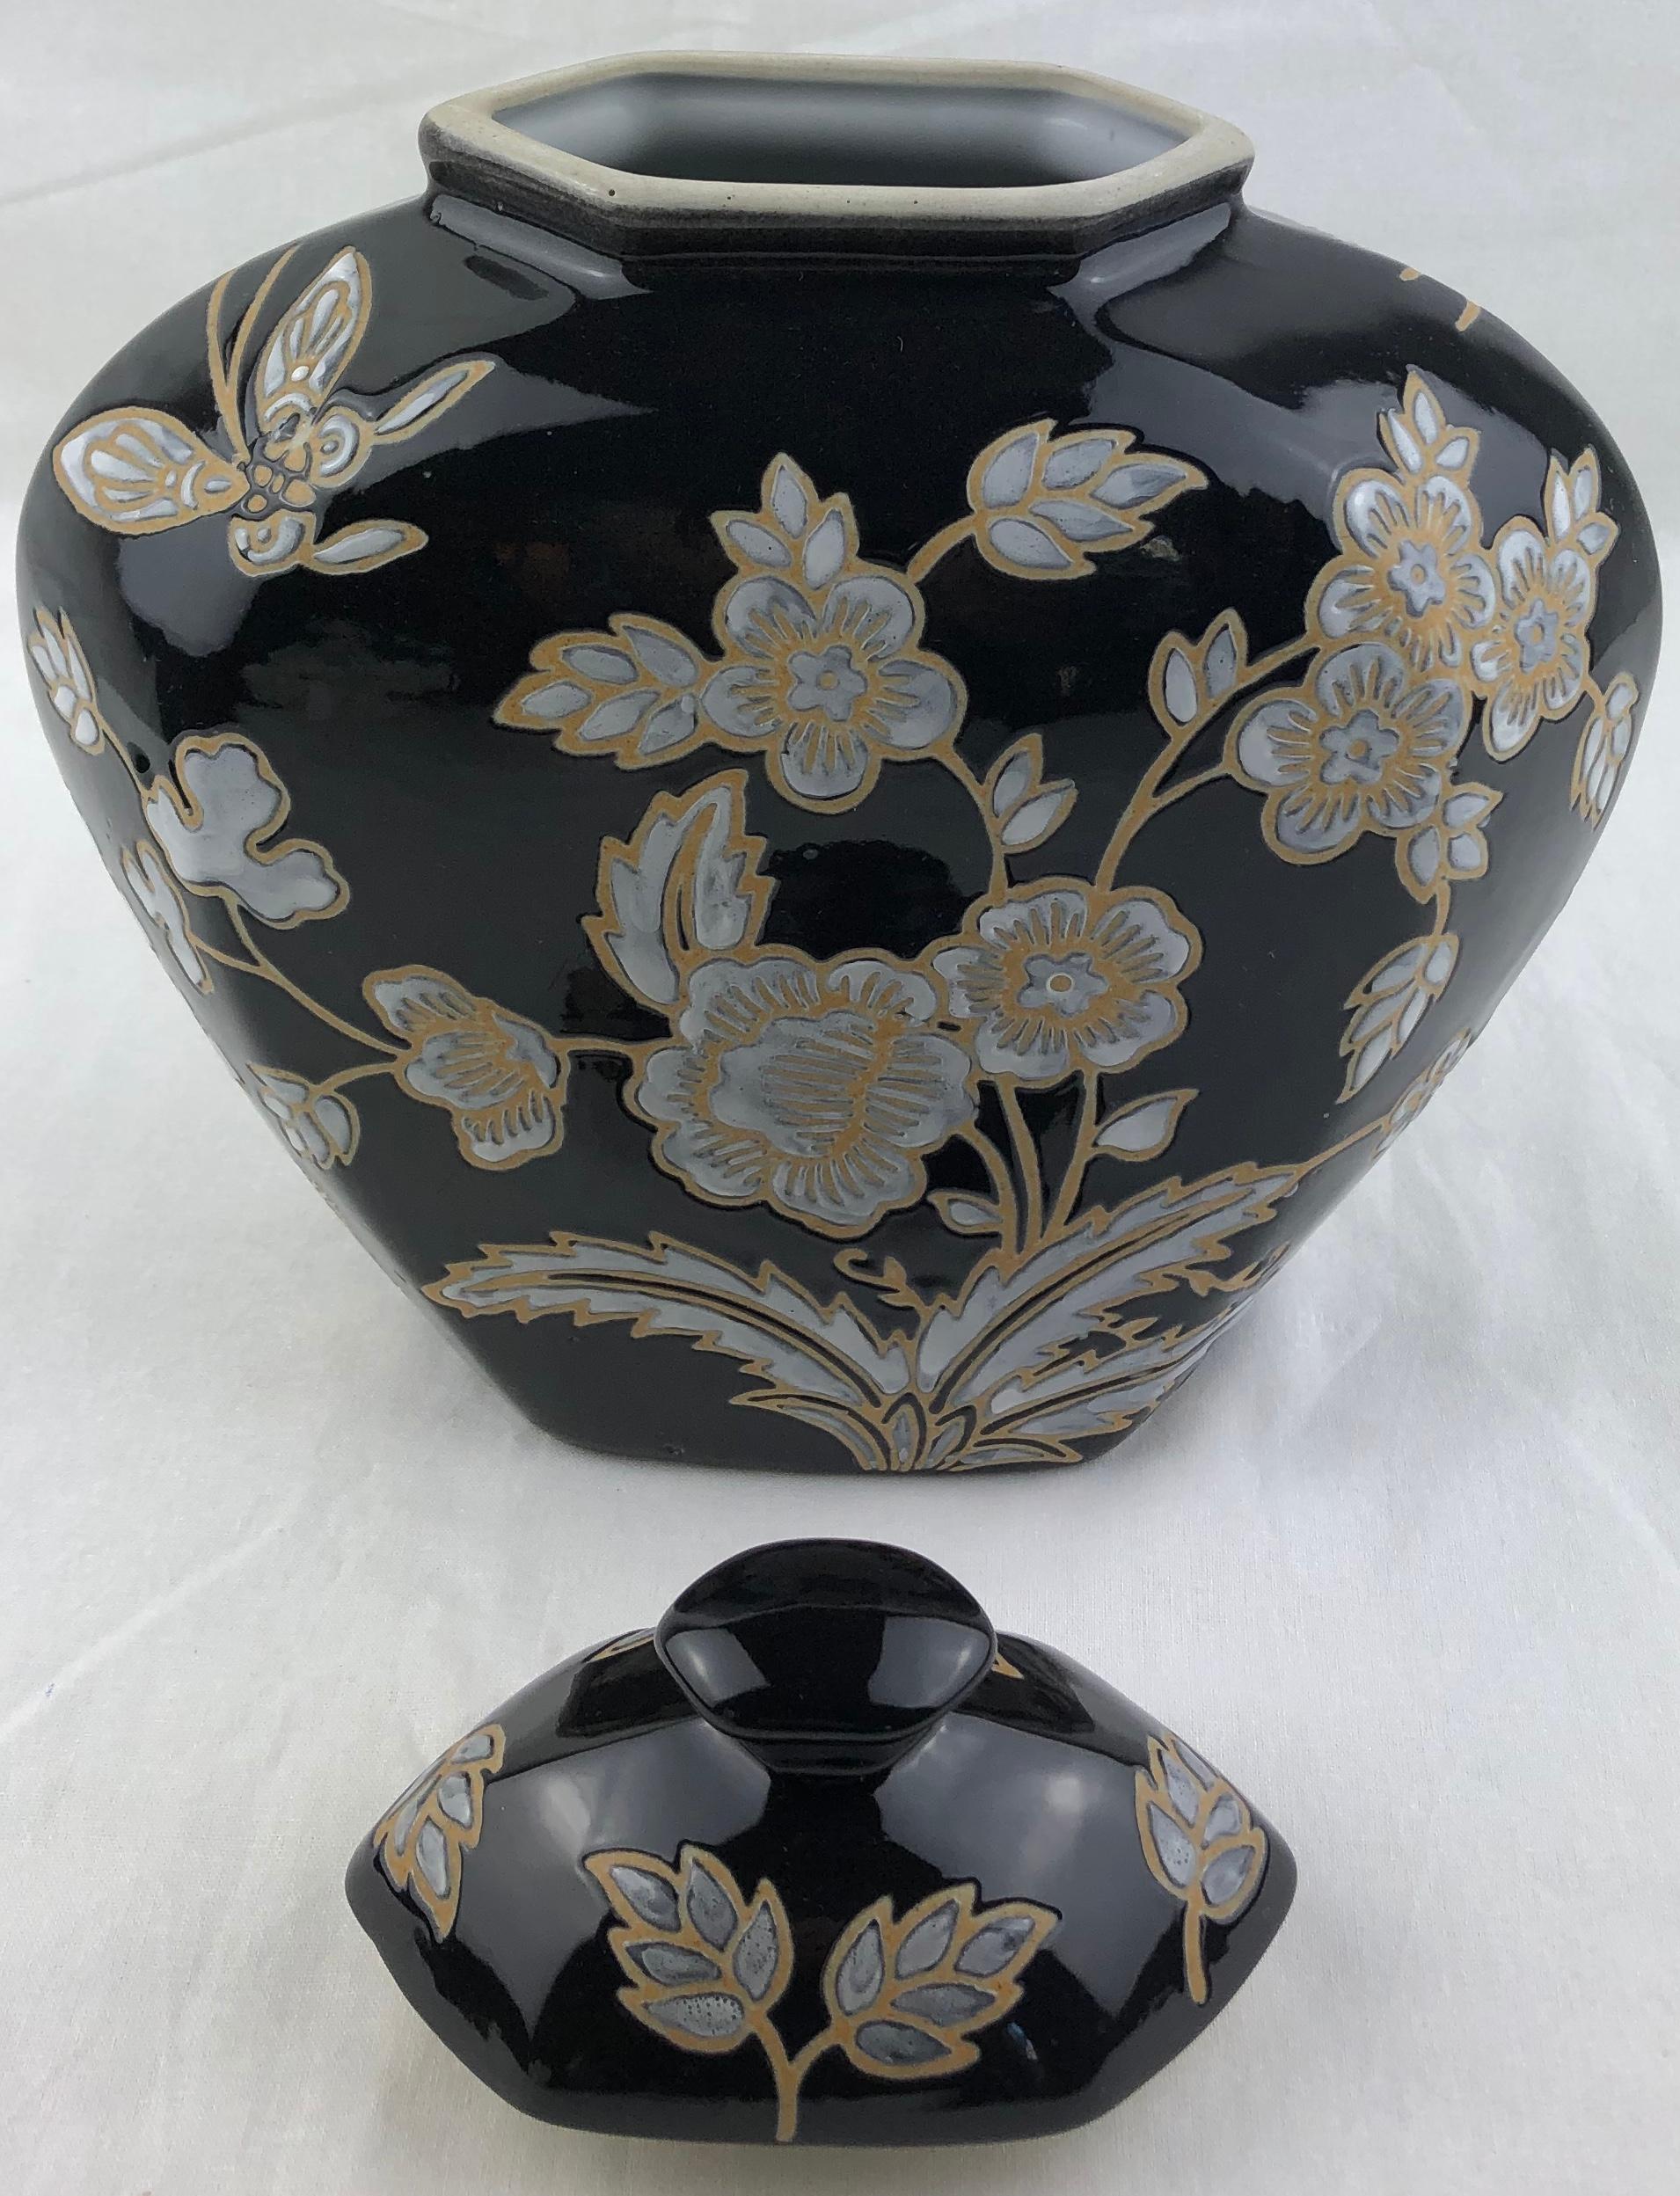 20th Century French Black and Antique White Majolica Lidded Jar with Molded Floral Decor For Sale